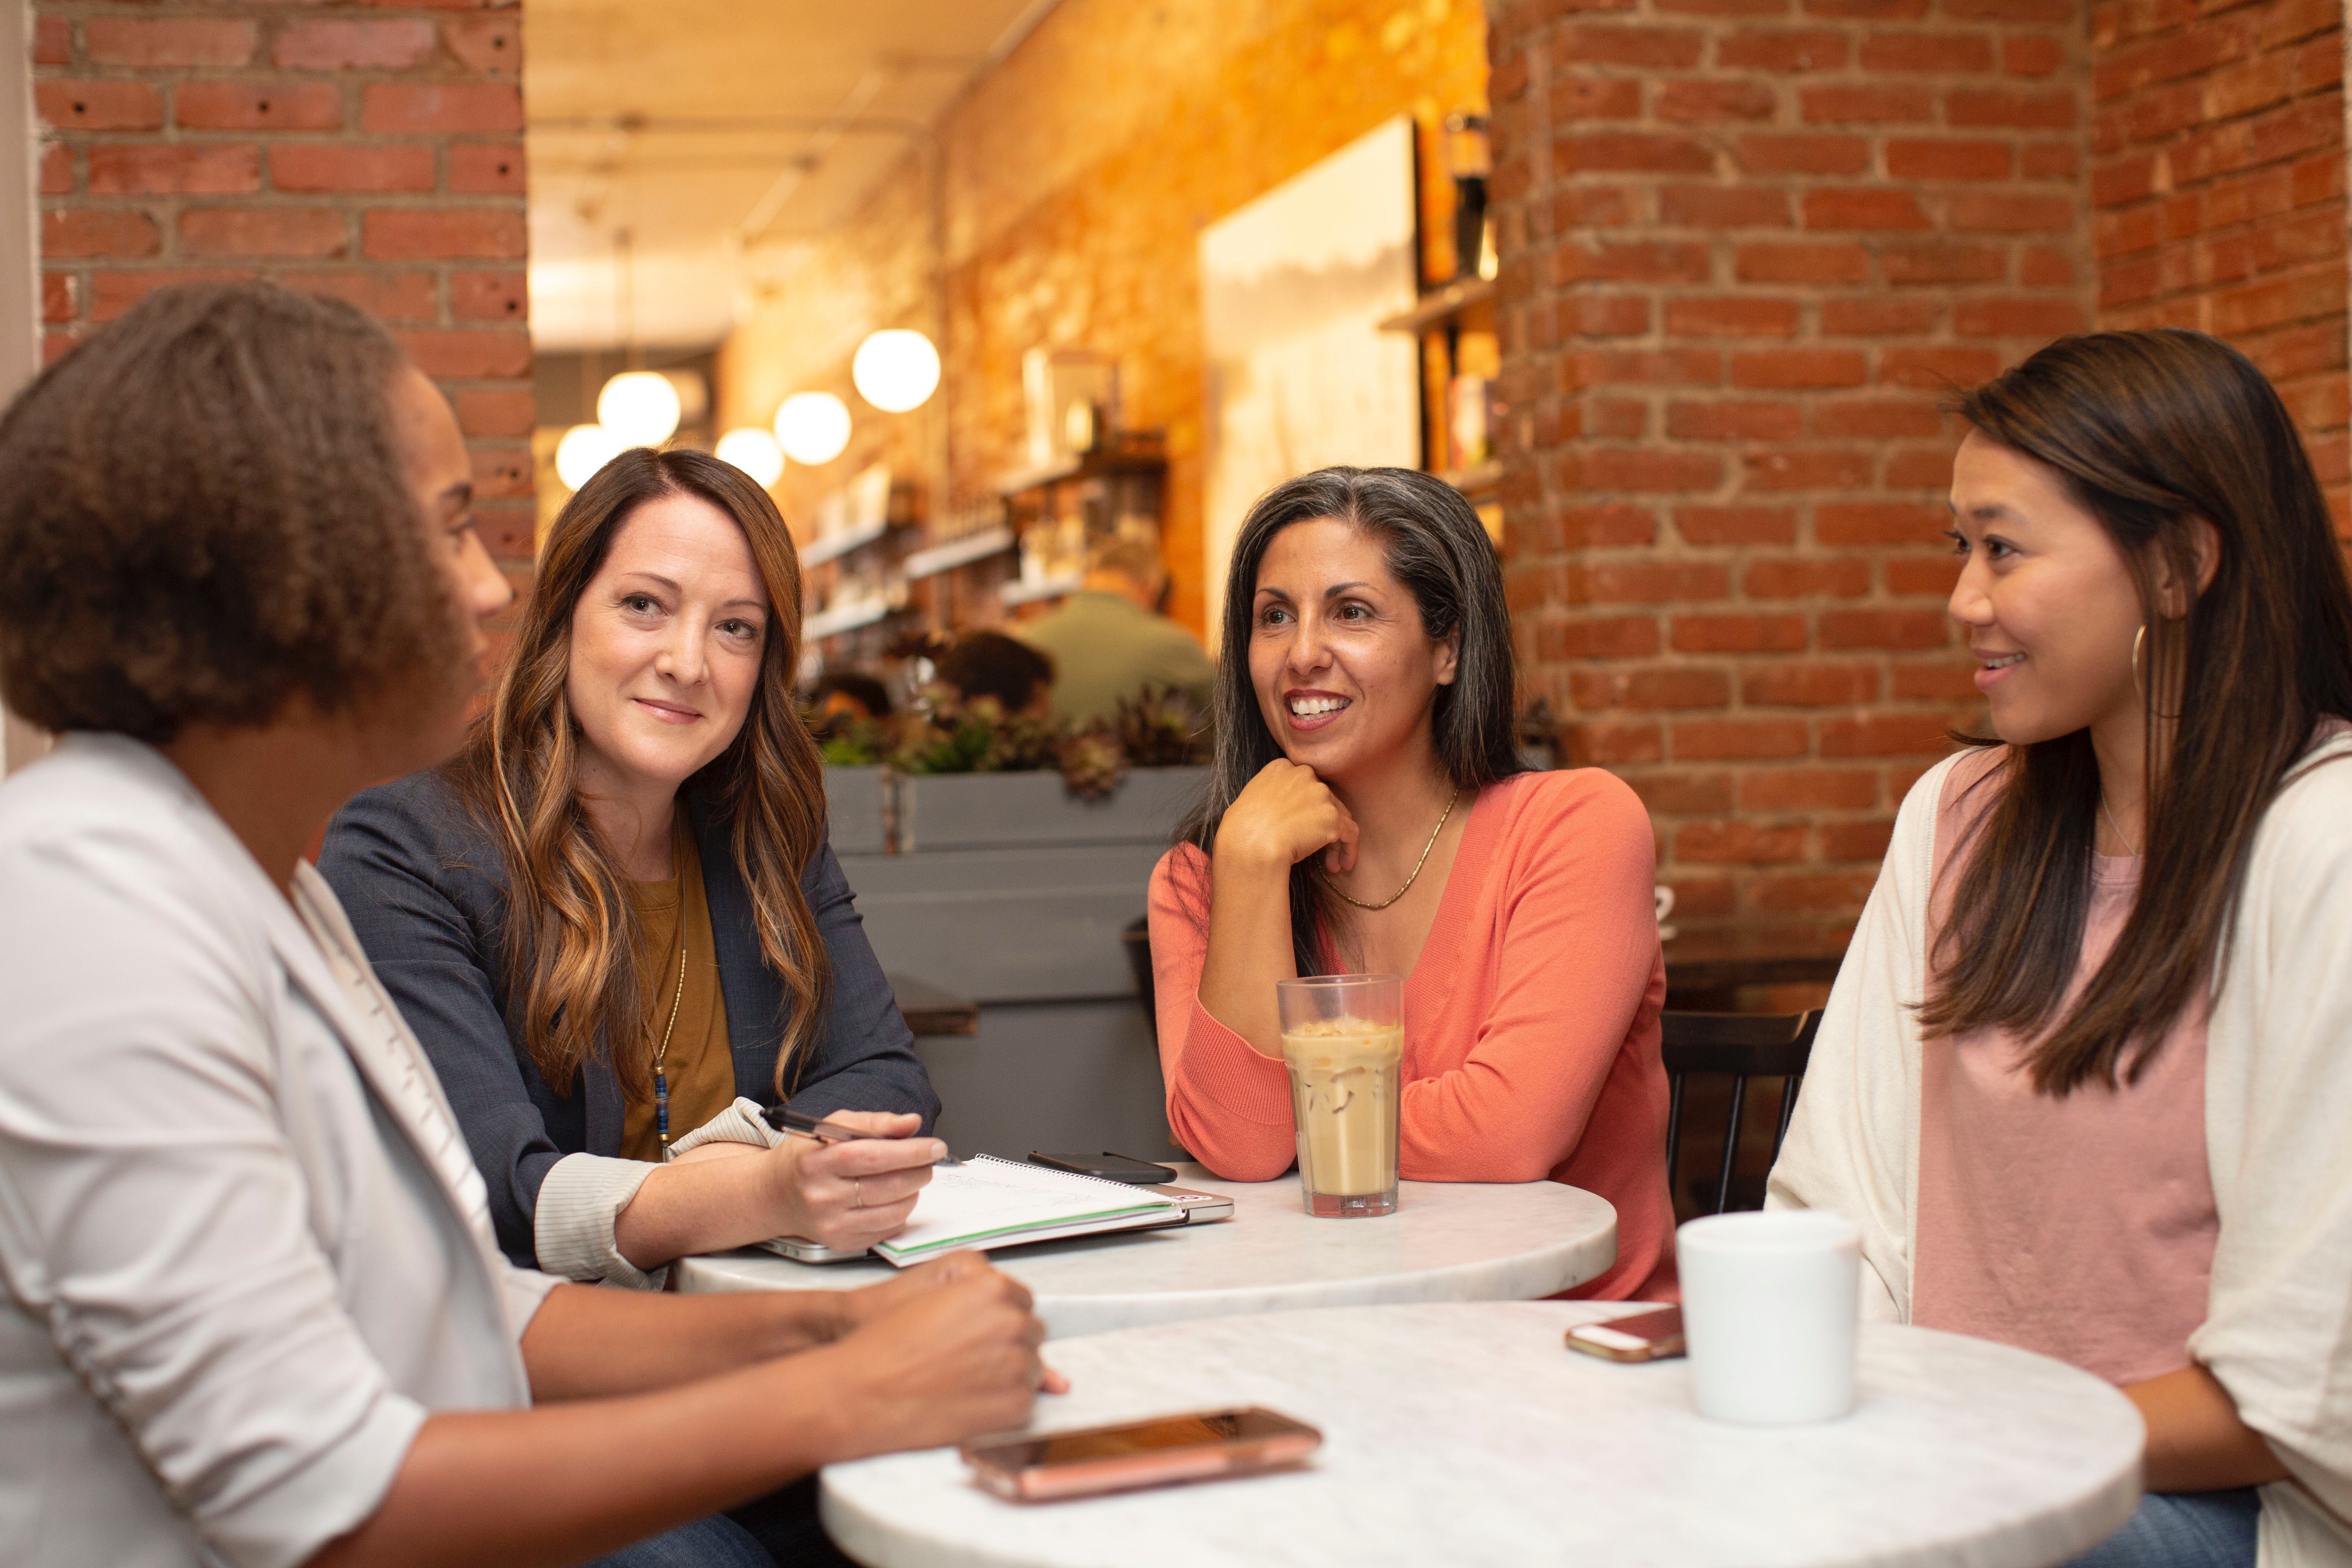 A group of women meet over coffee